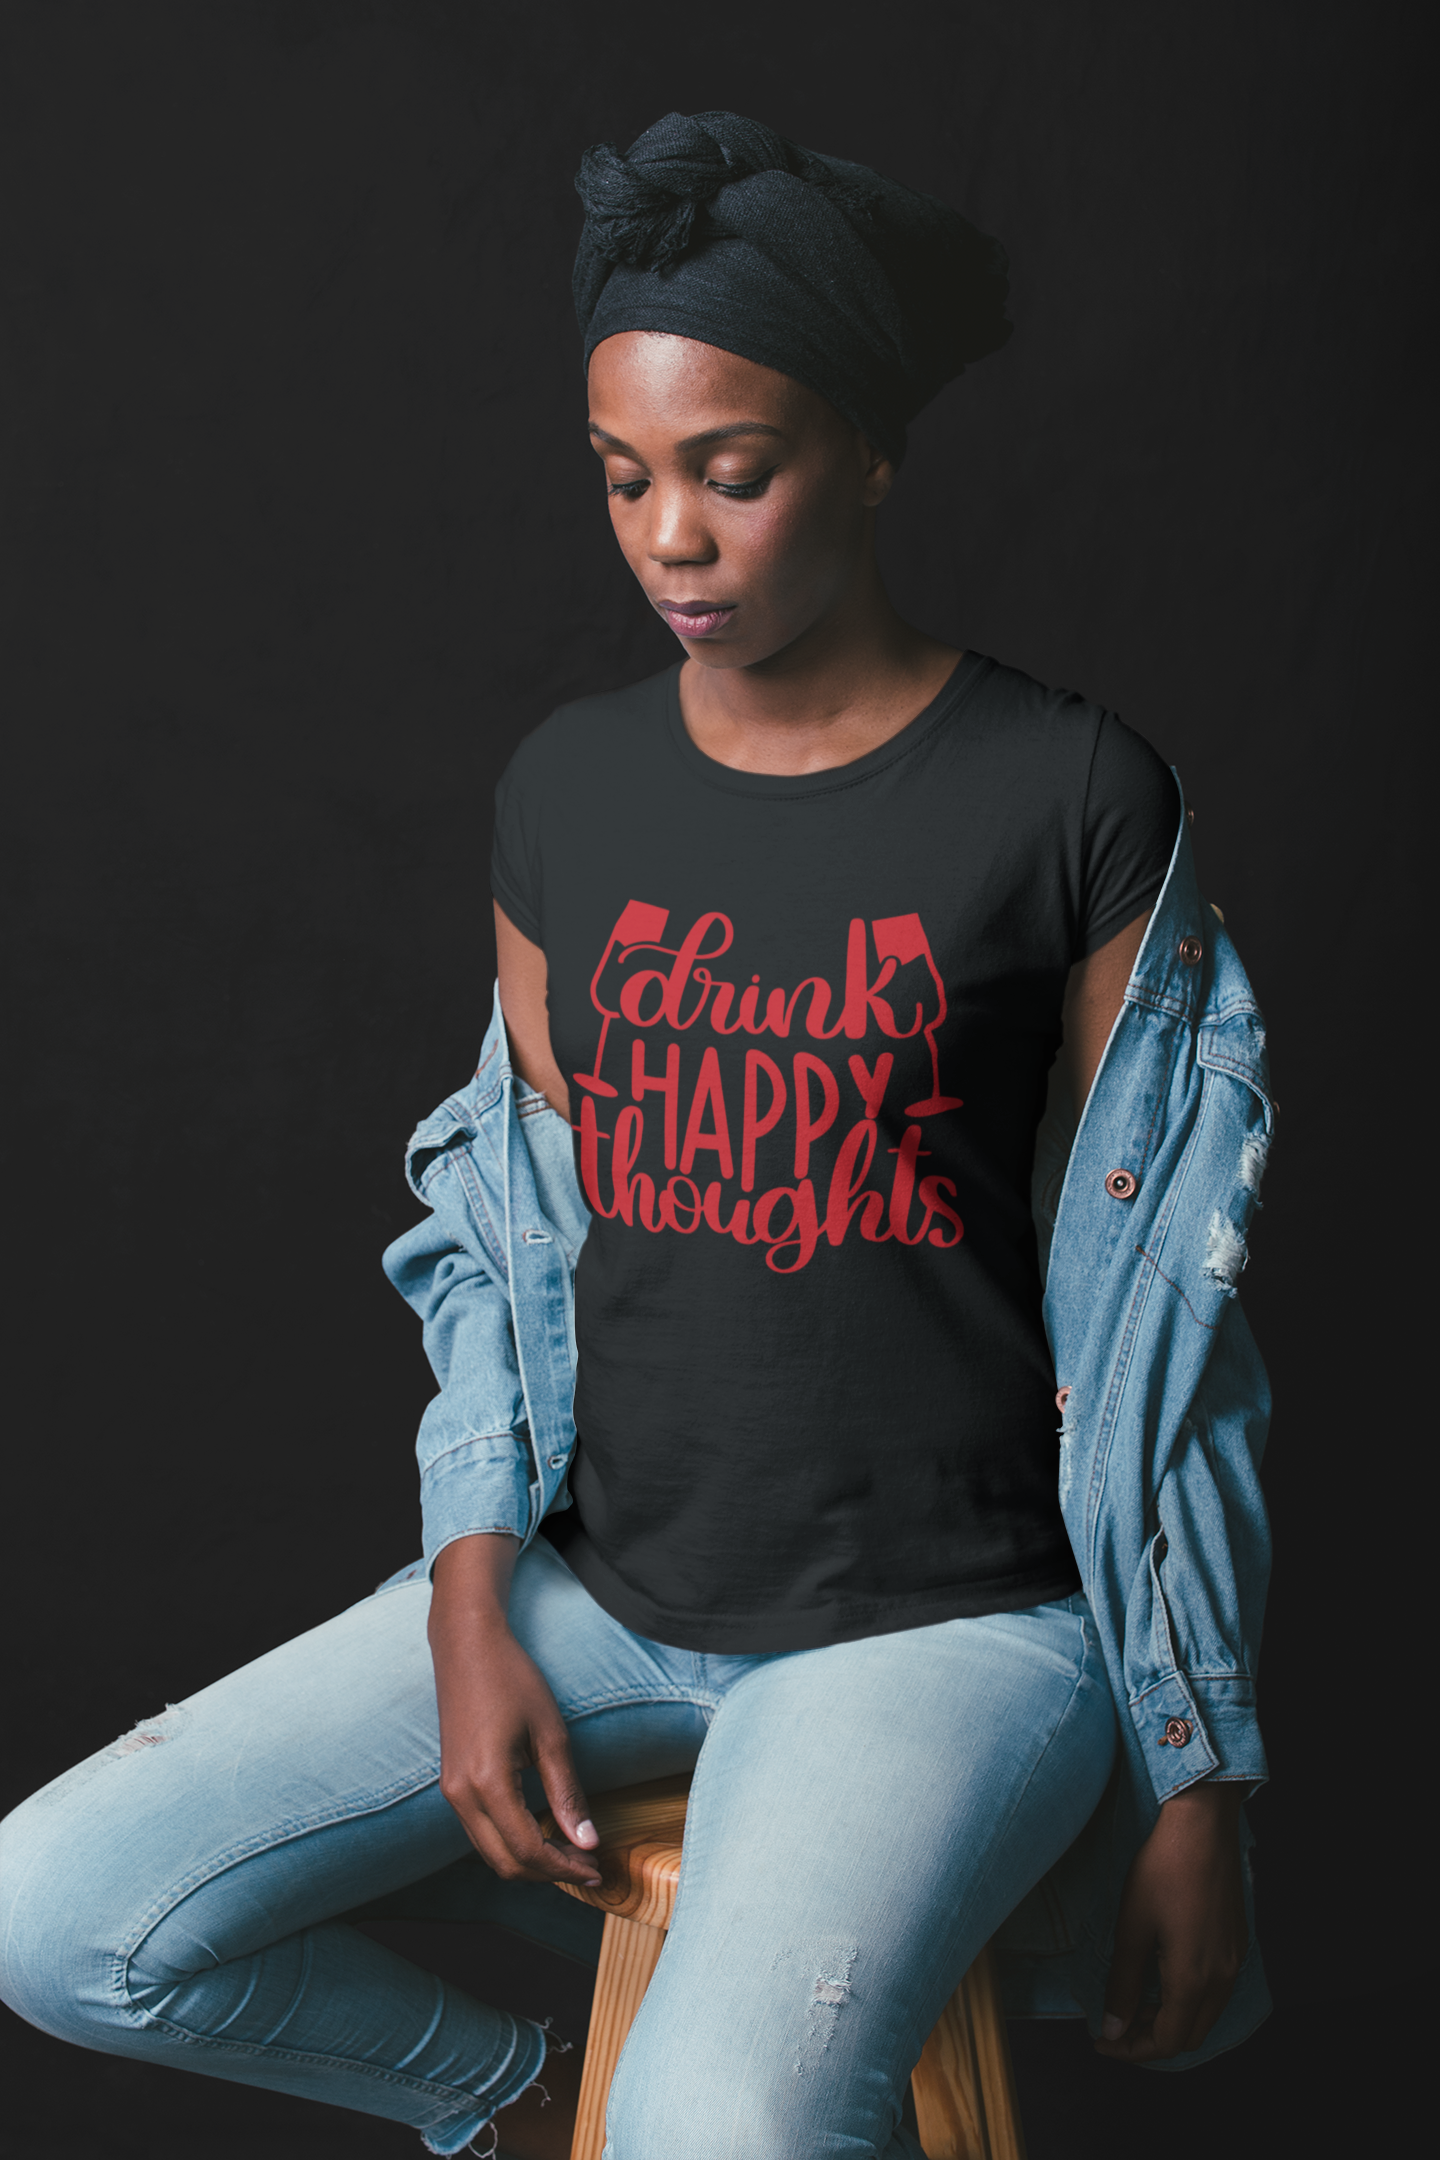 Drink Happy Thoughts Women Unisex t-shirt, Red Ladies Fit Shirt